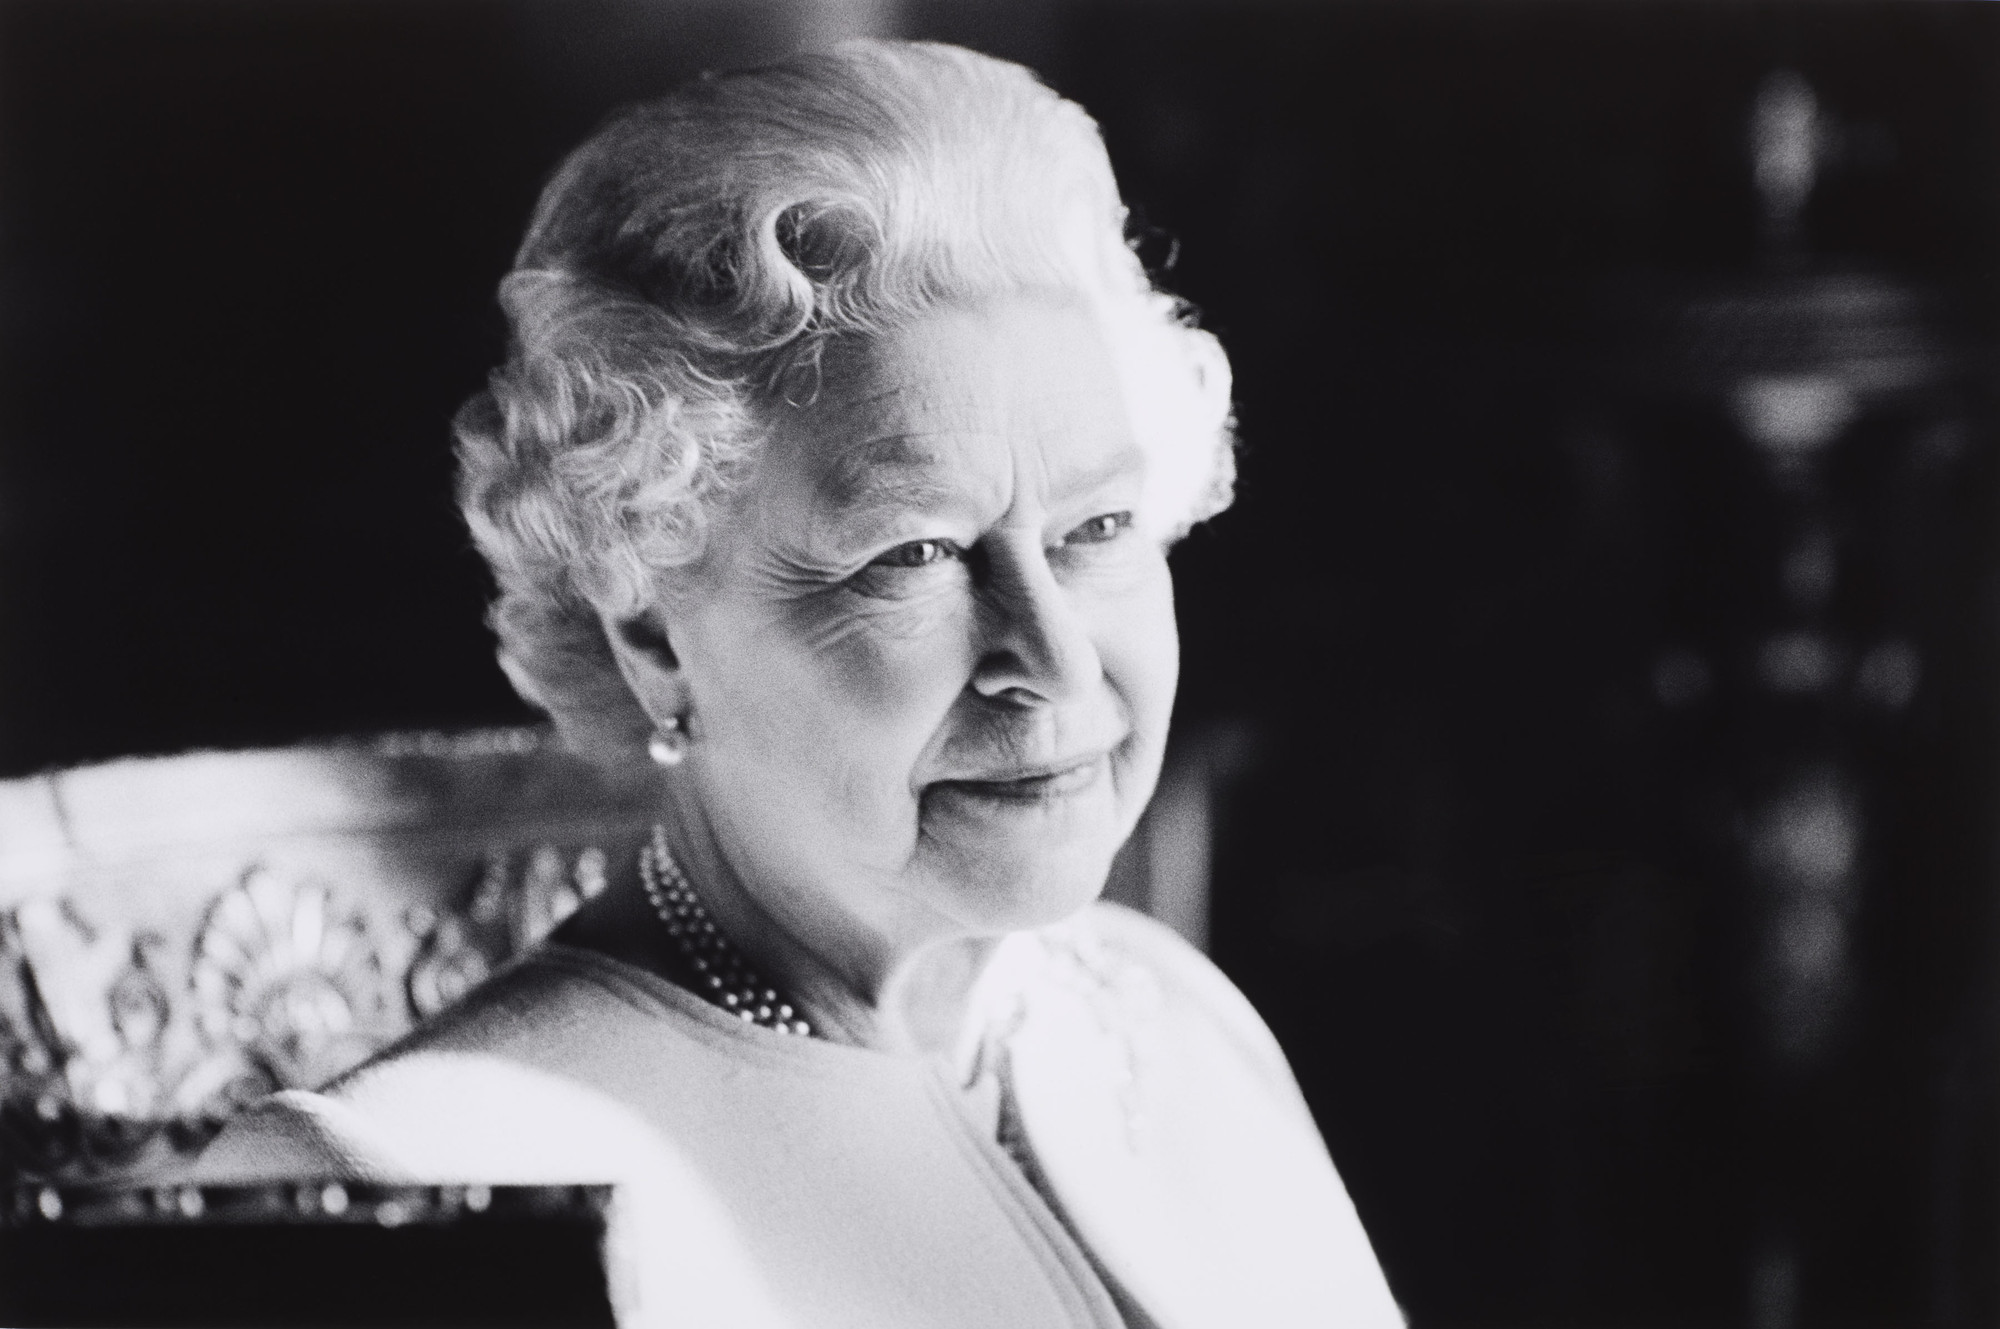 Queen Elizabeth II passed away due to old age, death certificate revealed
